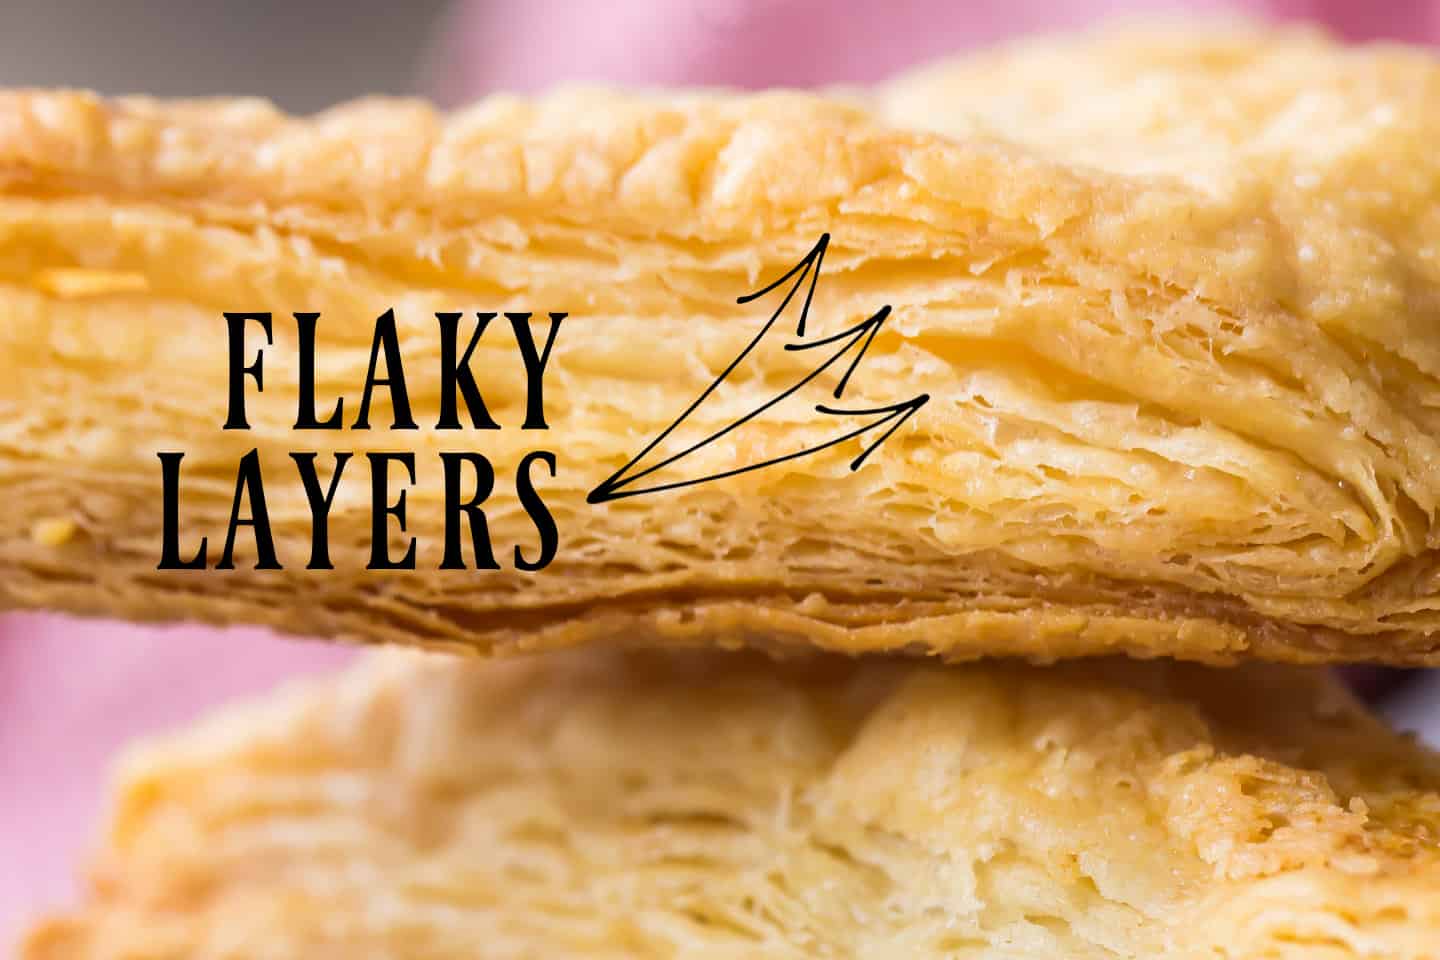 Close-up of puff pastry from the side, displaying the infinite number of flaky layers.